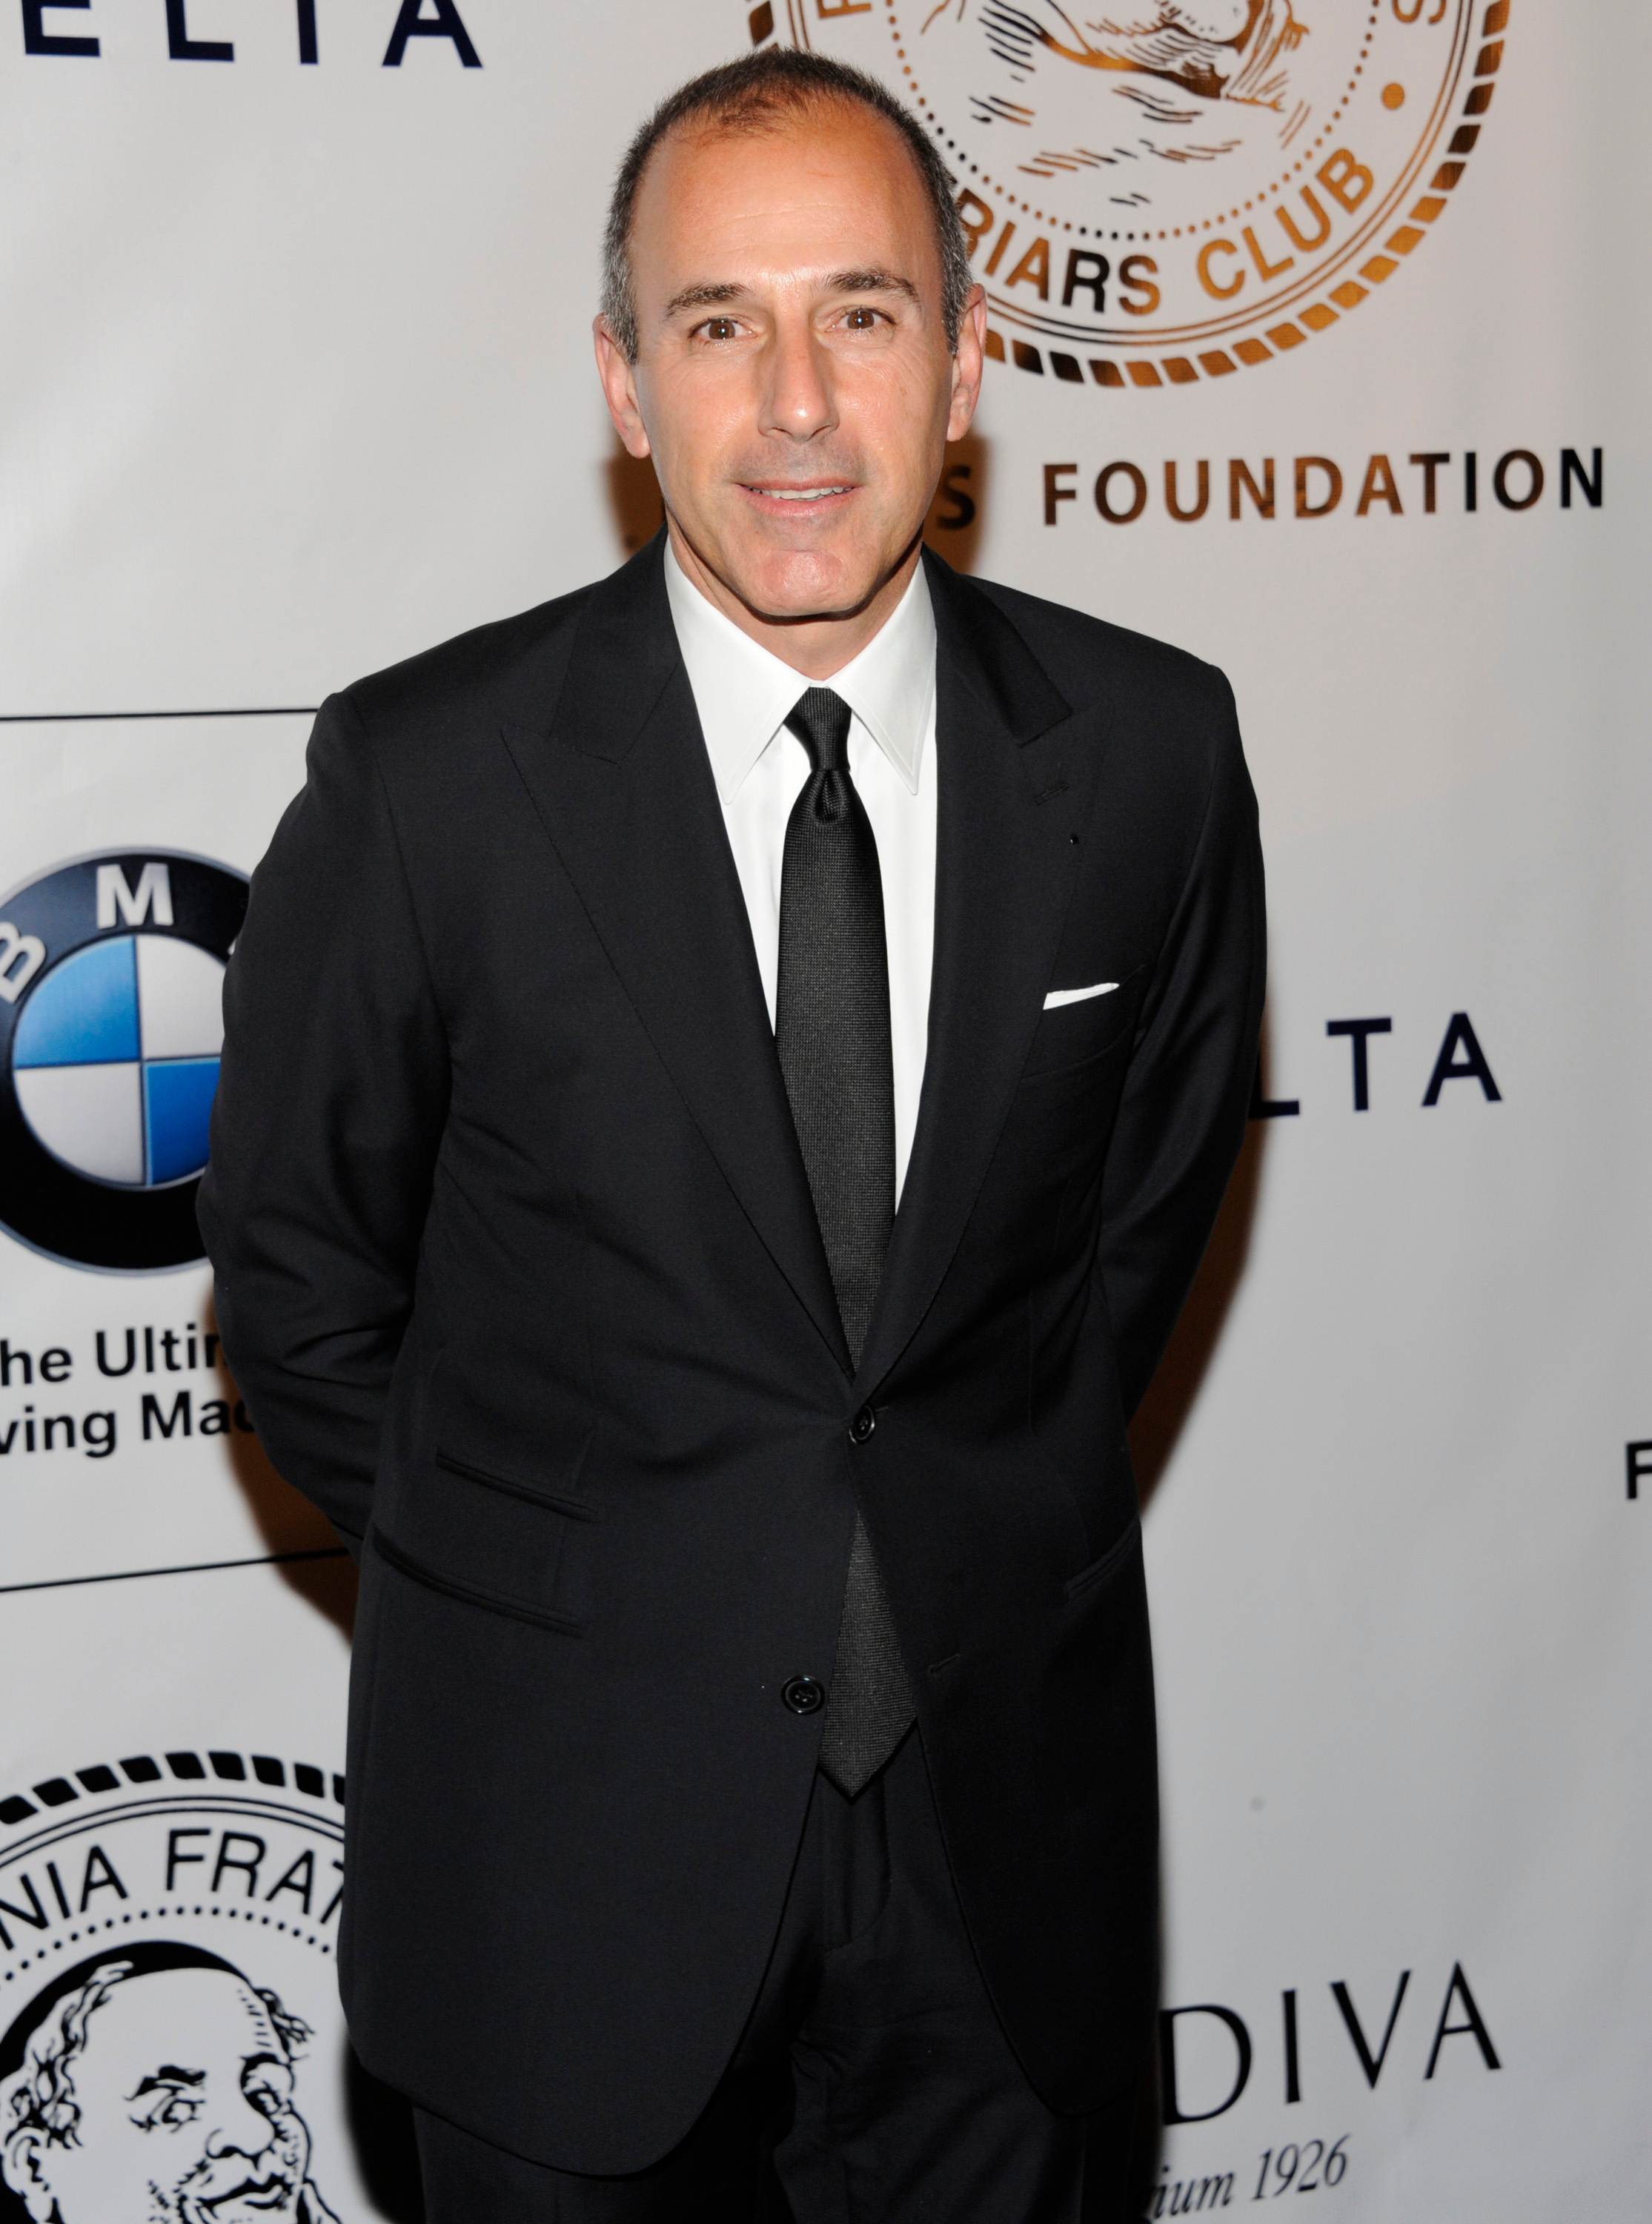 Matt Lauer’s Scandal 'Changed Everything' for Him: Find Out Where the Former ‘Today’ Host Is Now